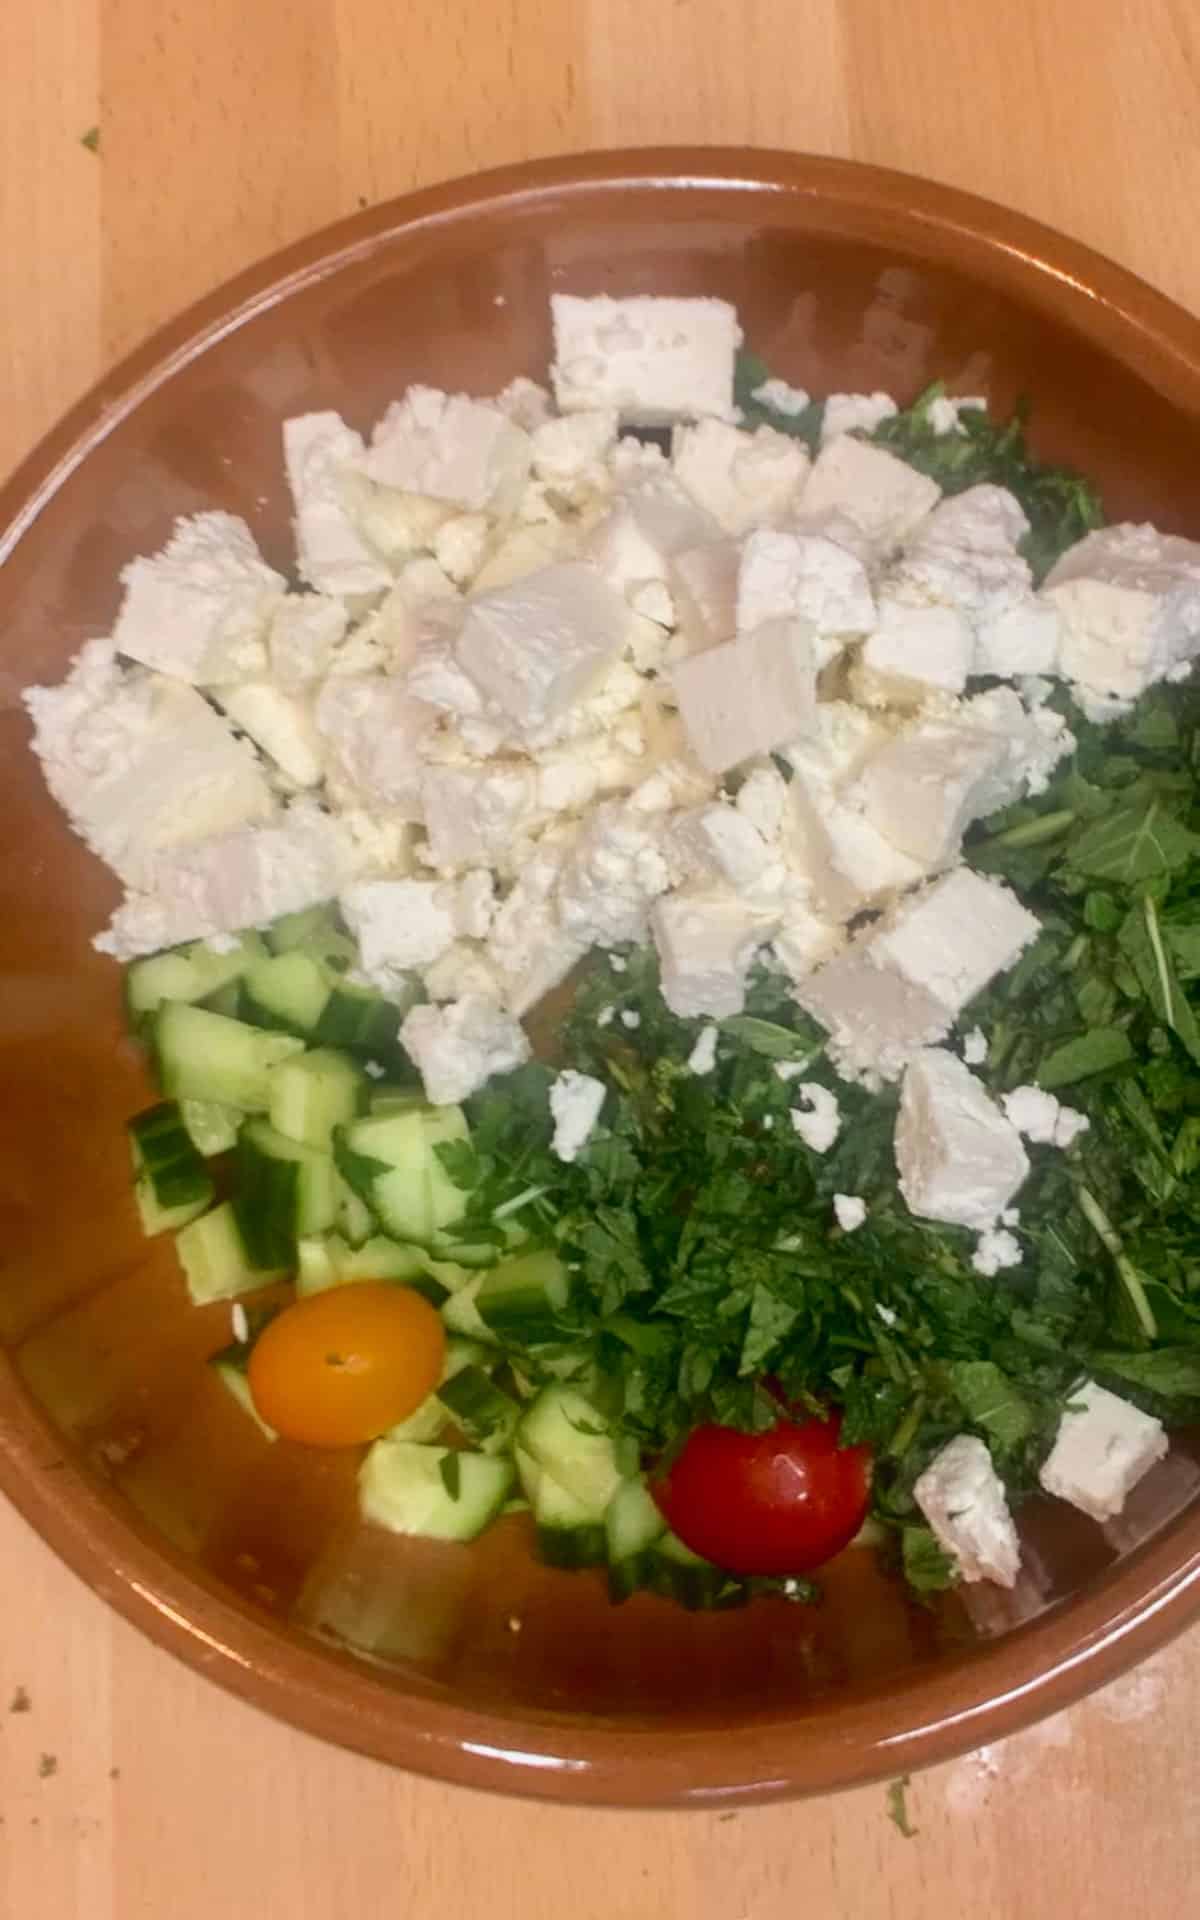 Overhead shot of feta and vegetable in a brown bowl